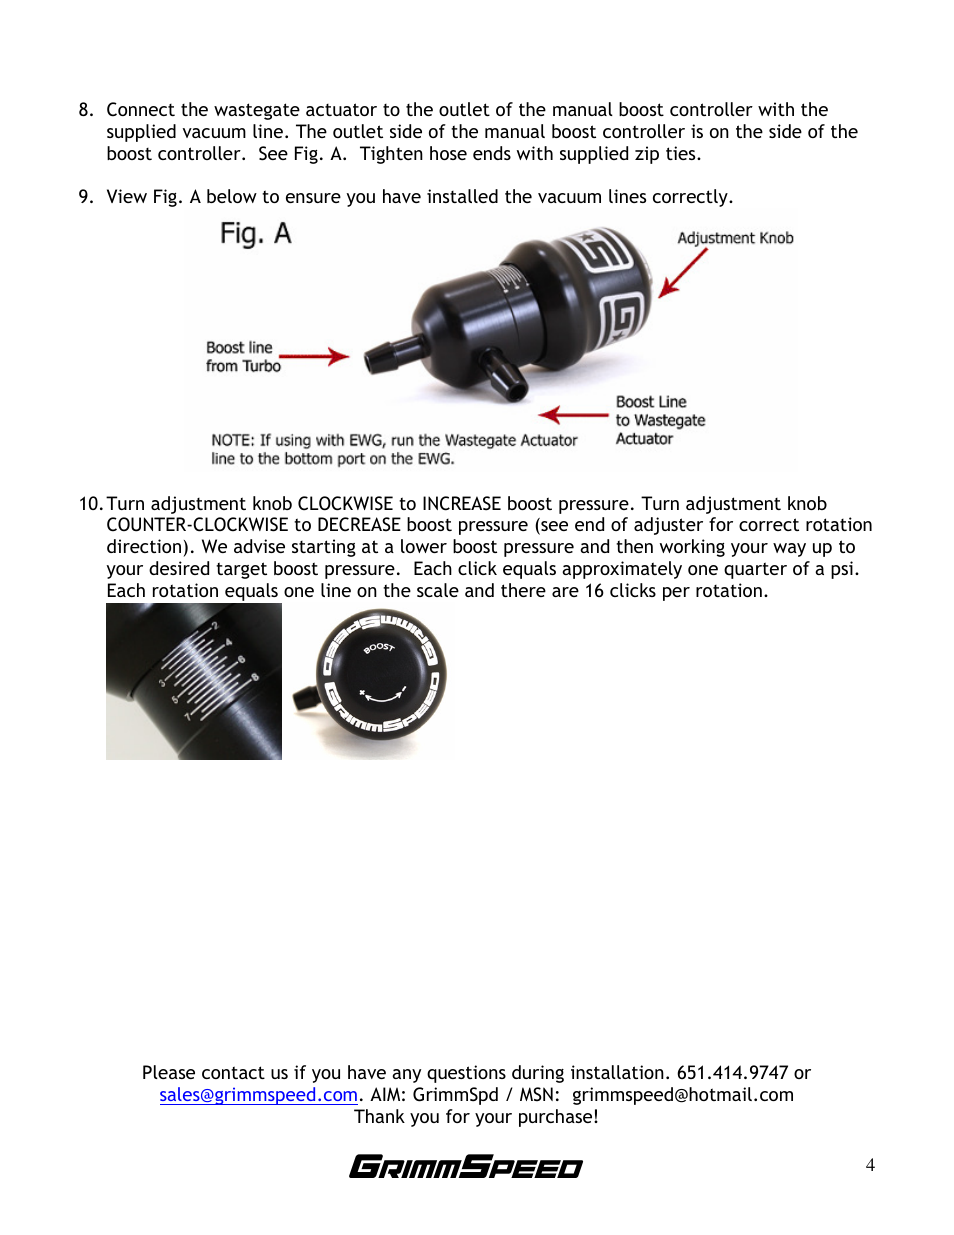 GrimmSpeed Manual Boost Controller User Manual | Page 4 / 4